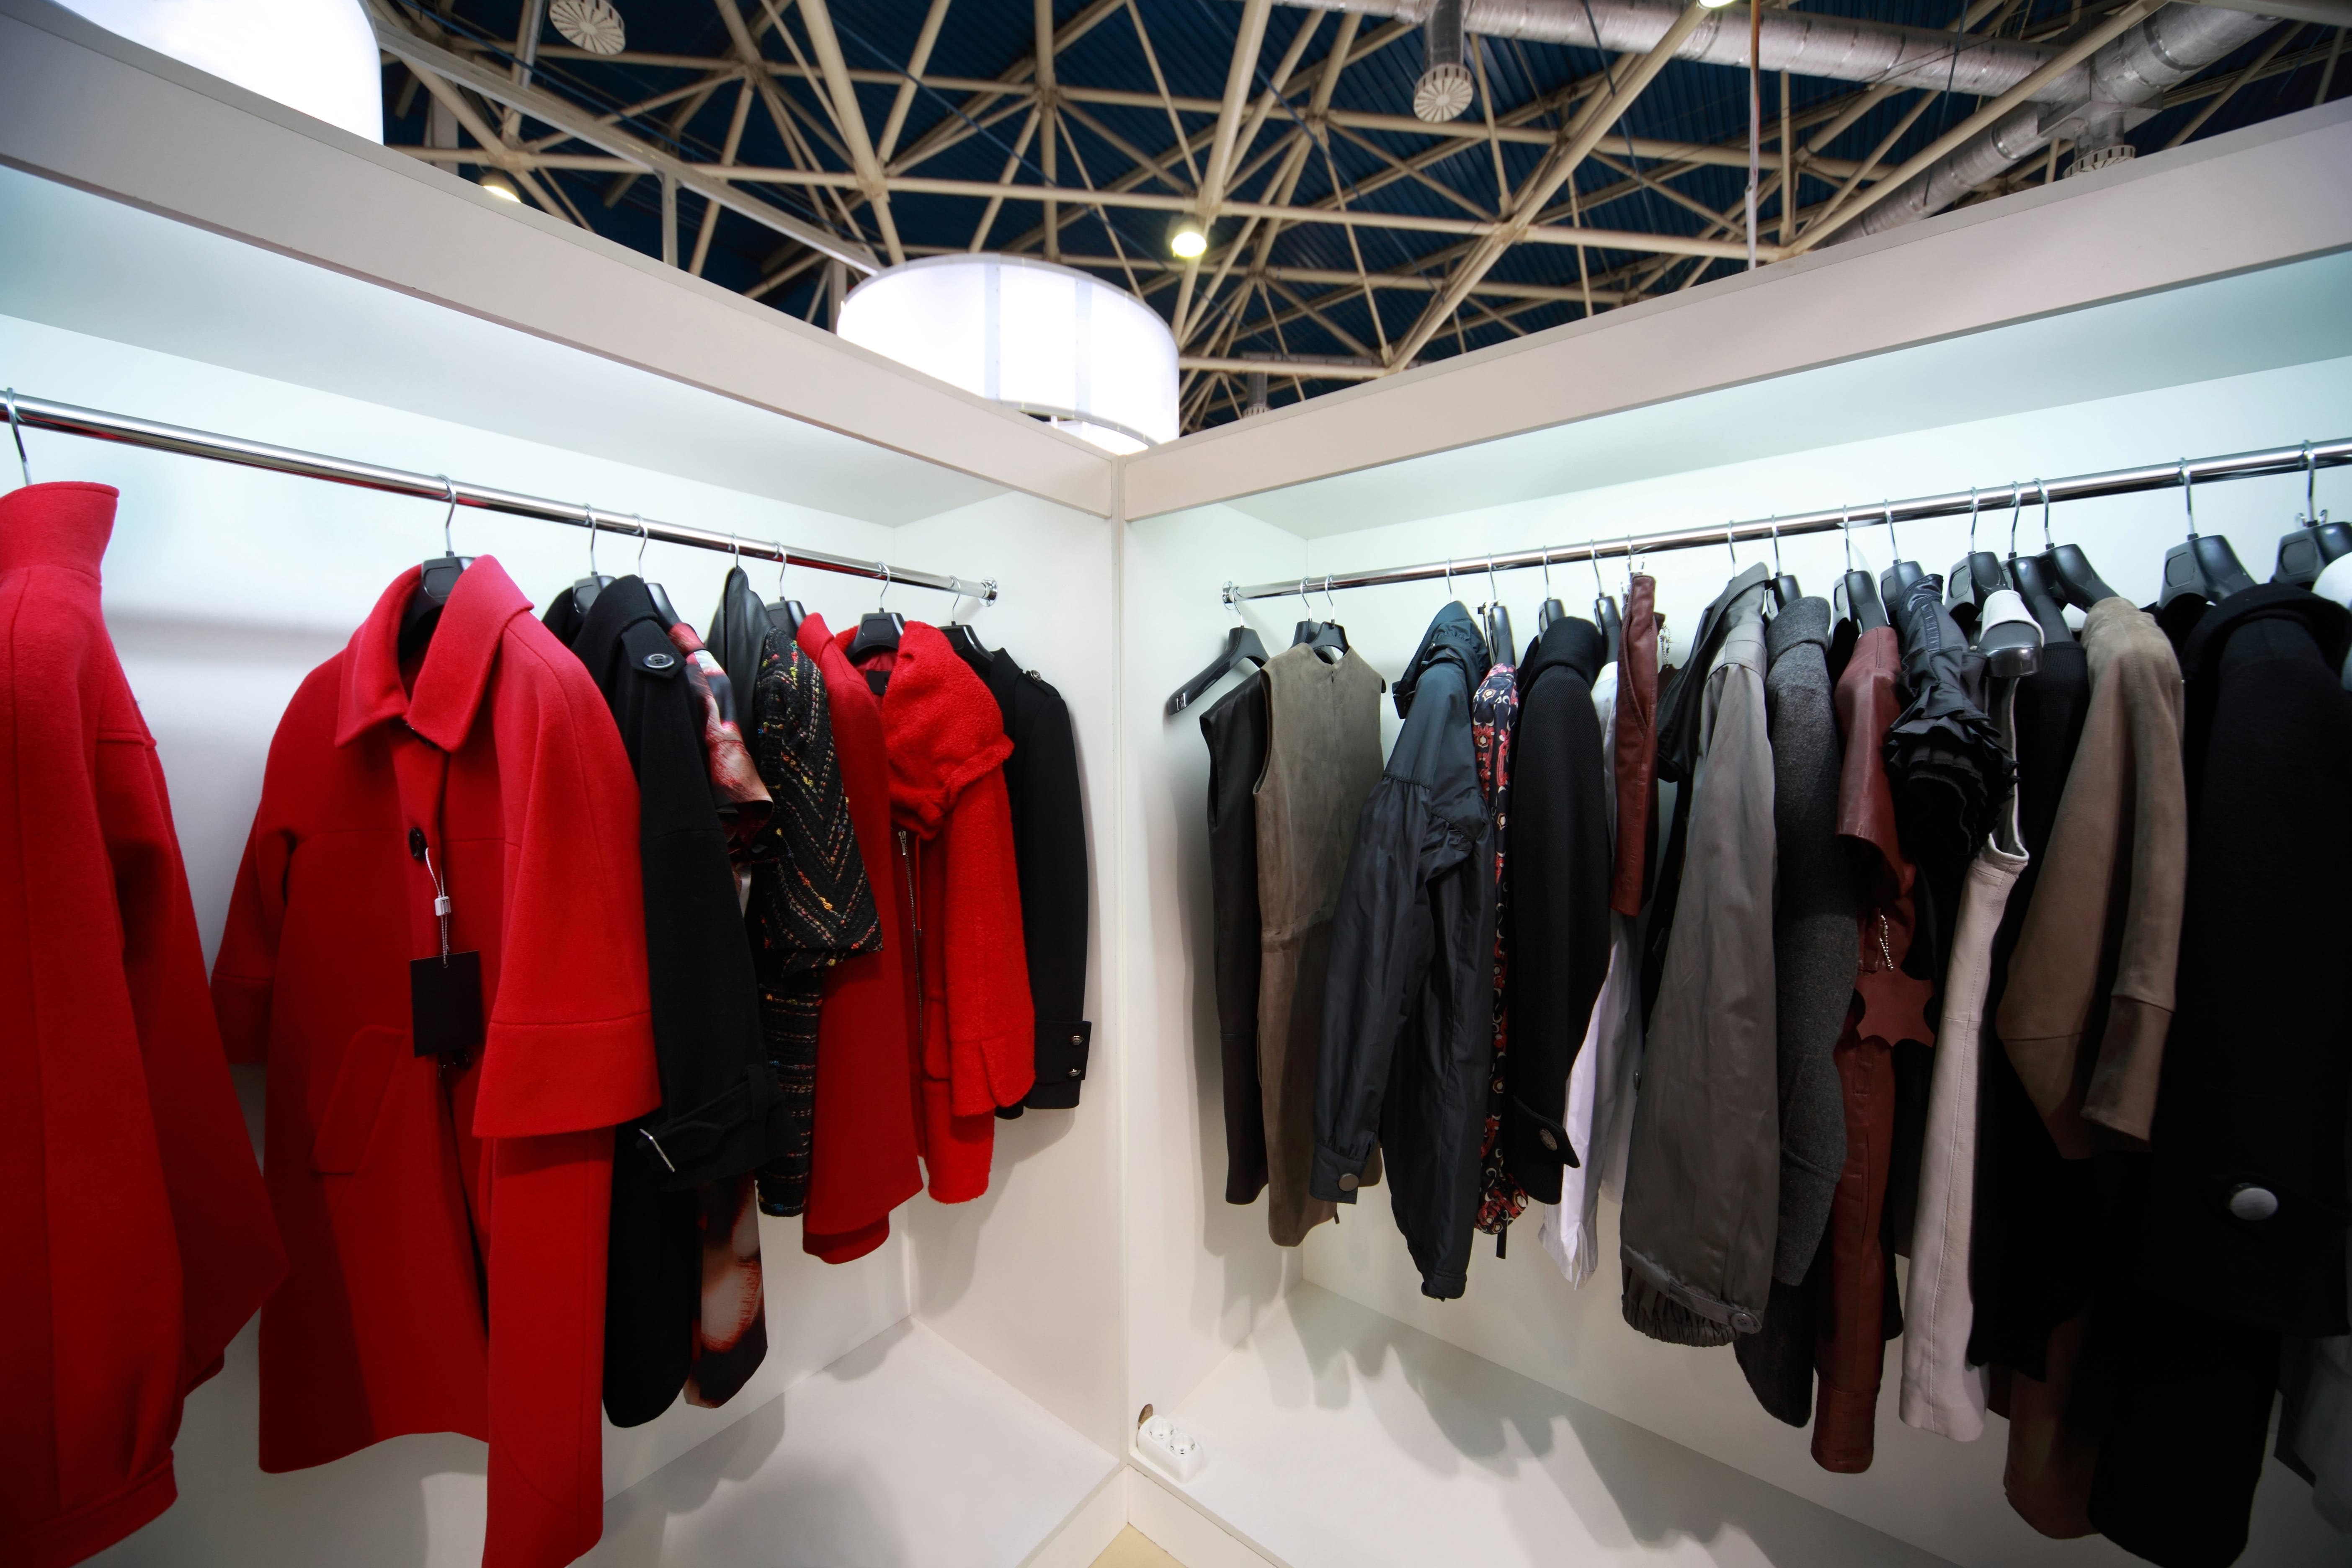 Firm outer clothing hangs at demonstration stands in showroom